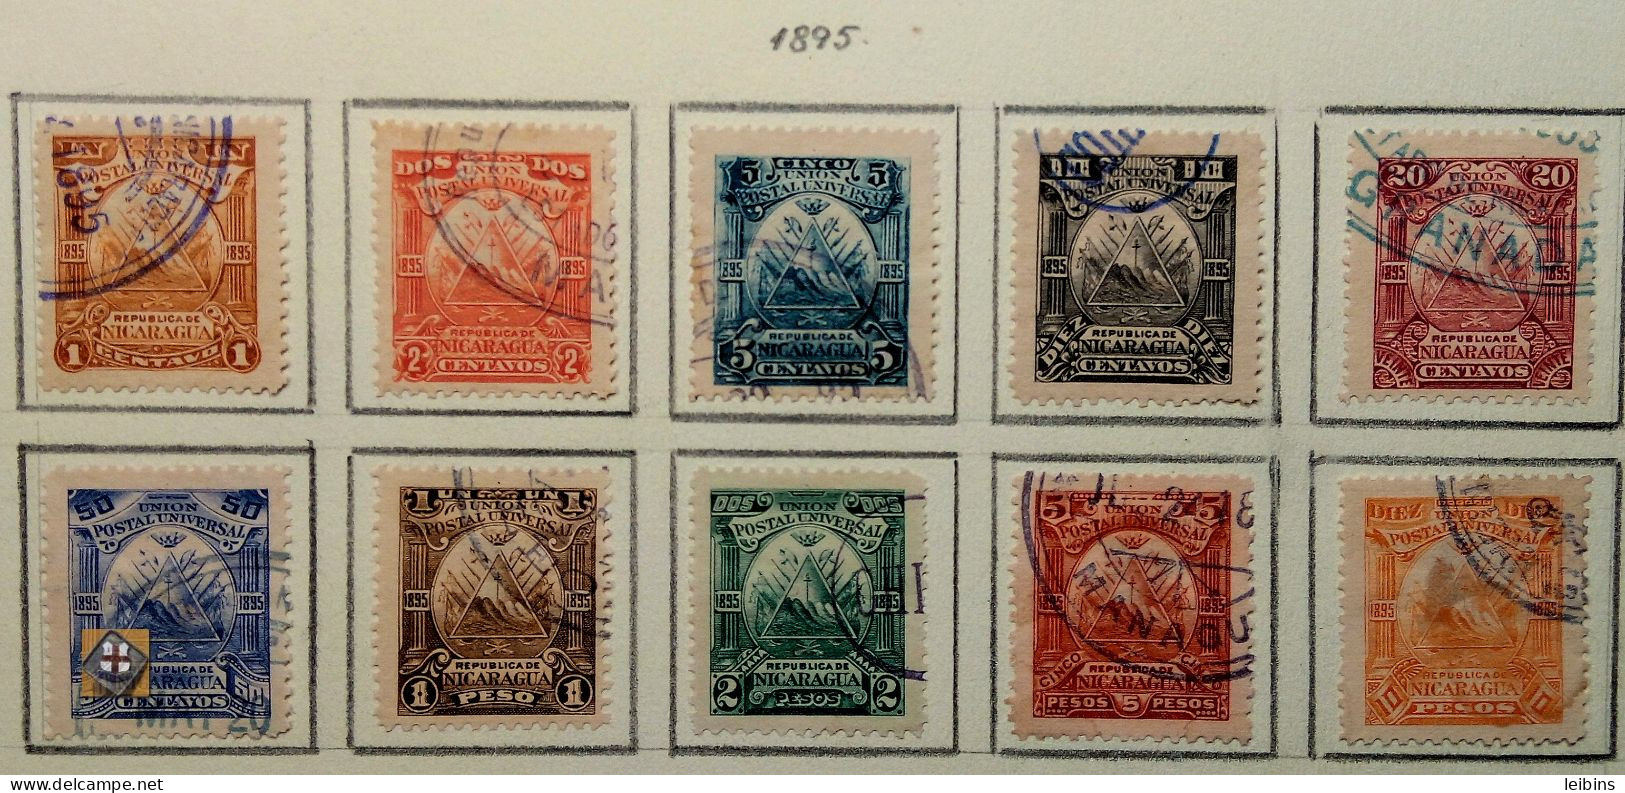 Nicaragua, from year 1882 (collection)